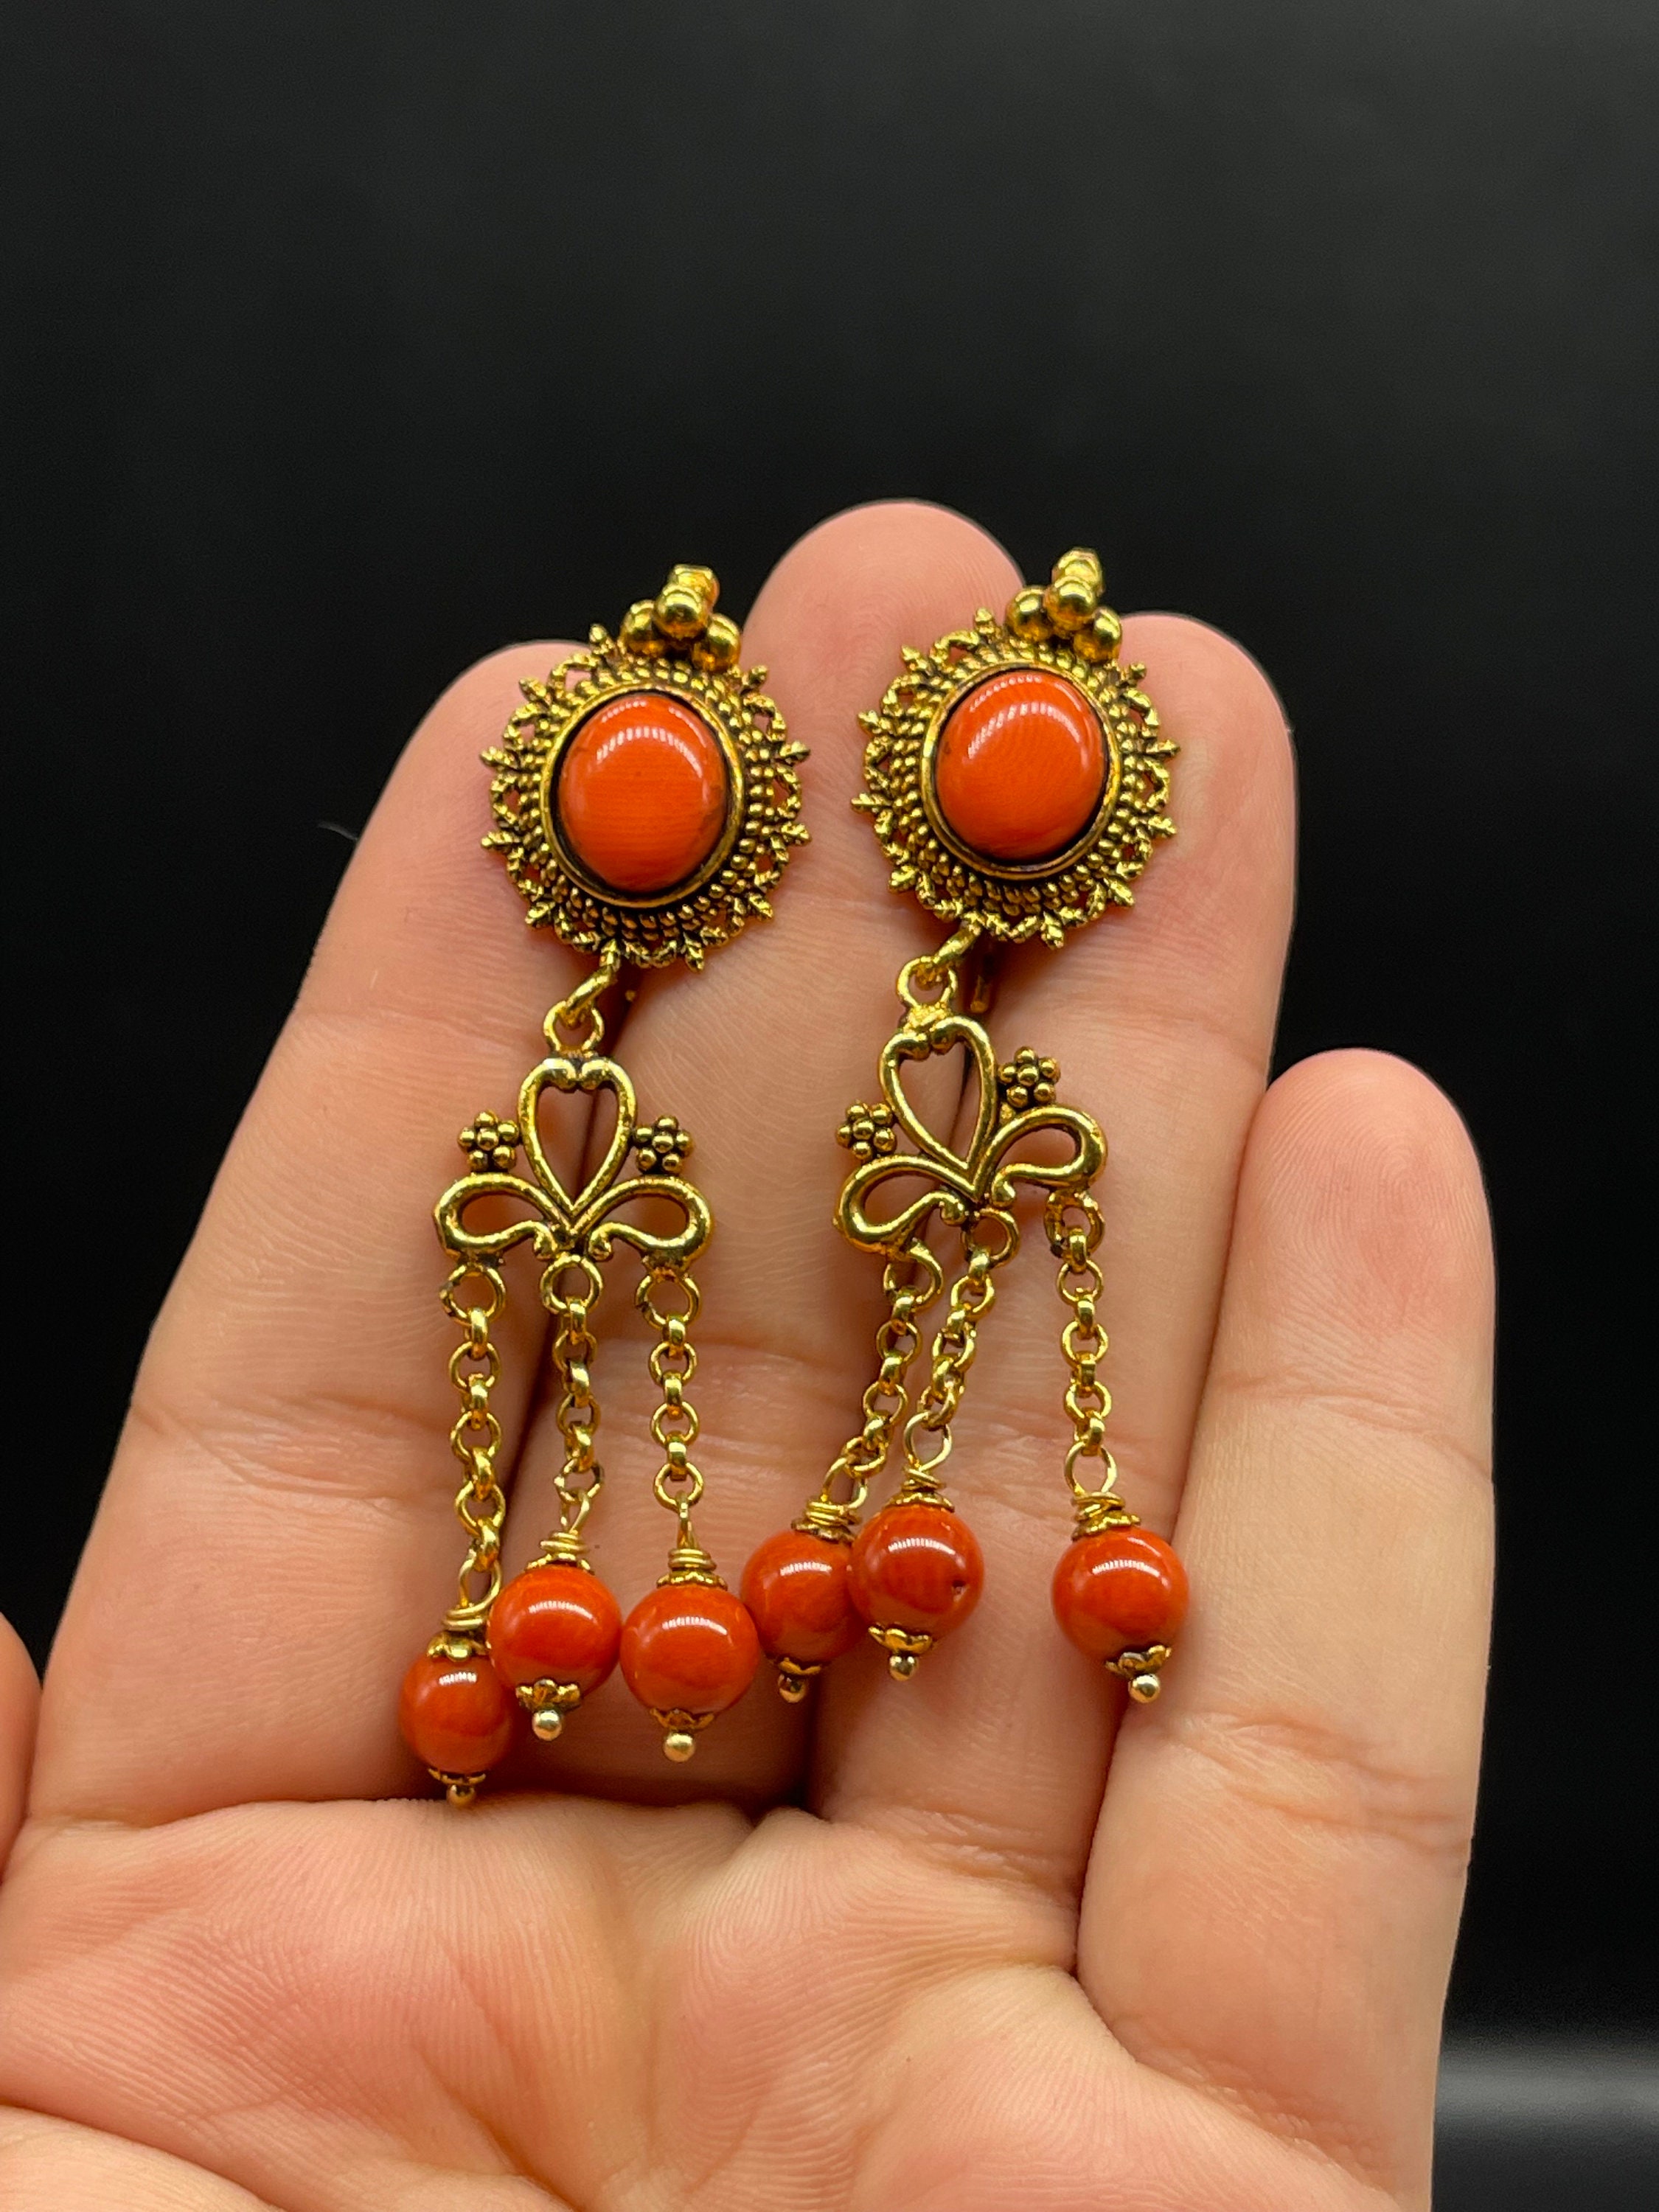 Fabulous Old Antique Tibetan Ceremonial Earring With Brass and Antique  Coral Earrings, Ceremonial Ear Ornament Ancient Tibetan Jewellery - Etsy UK